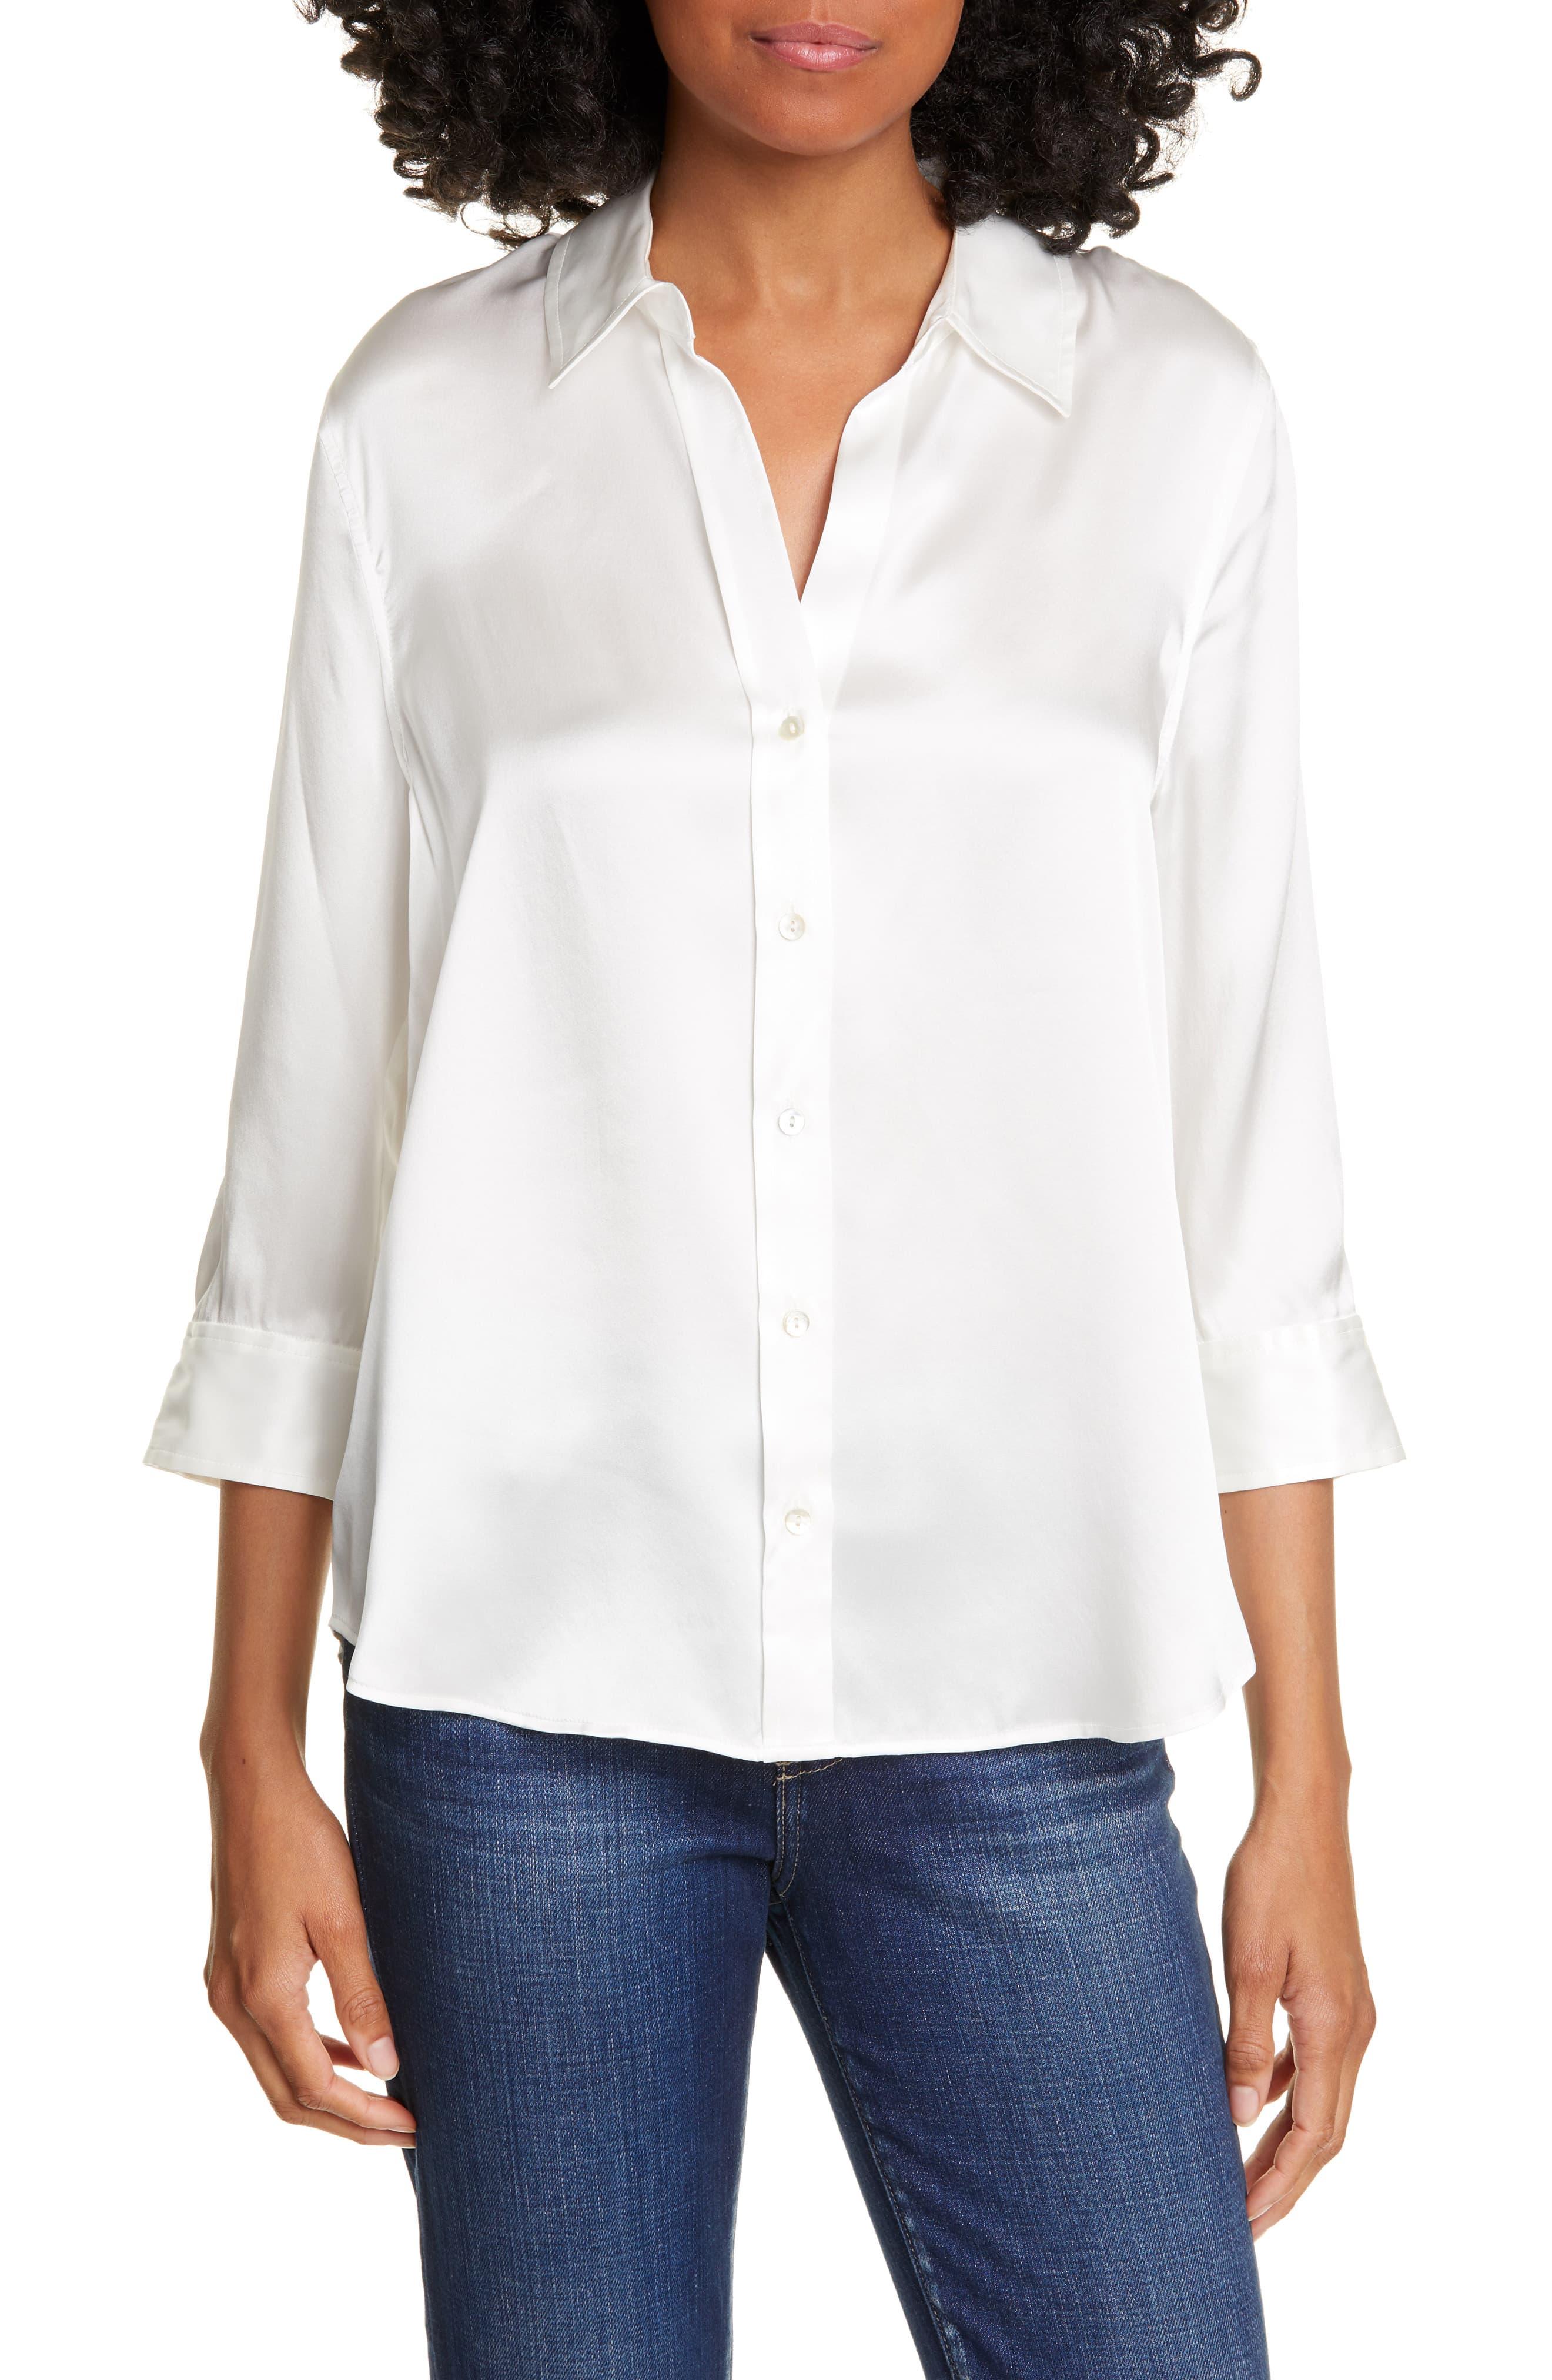 L'Agence Dani Silk Charmeuse Blouse in Ivory (White) - Lyst